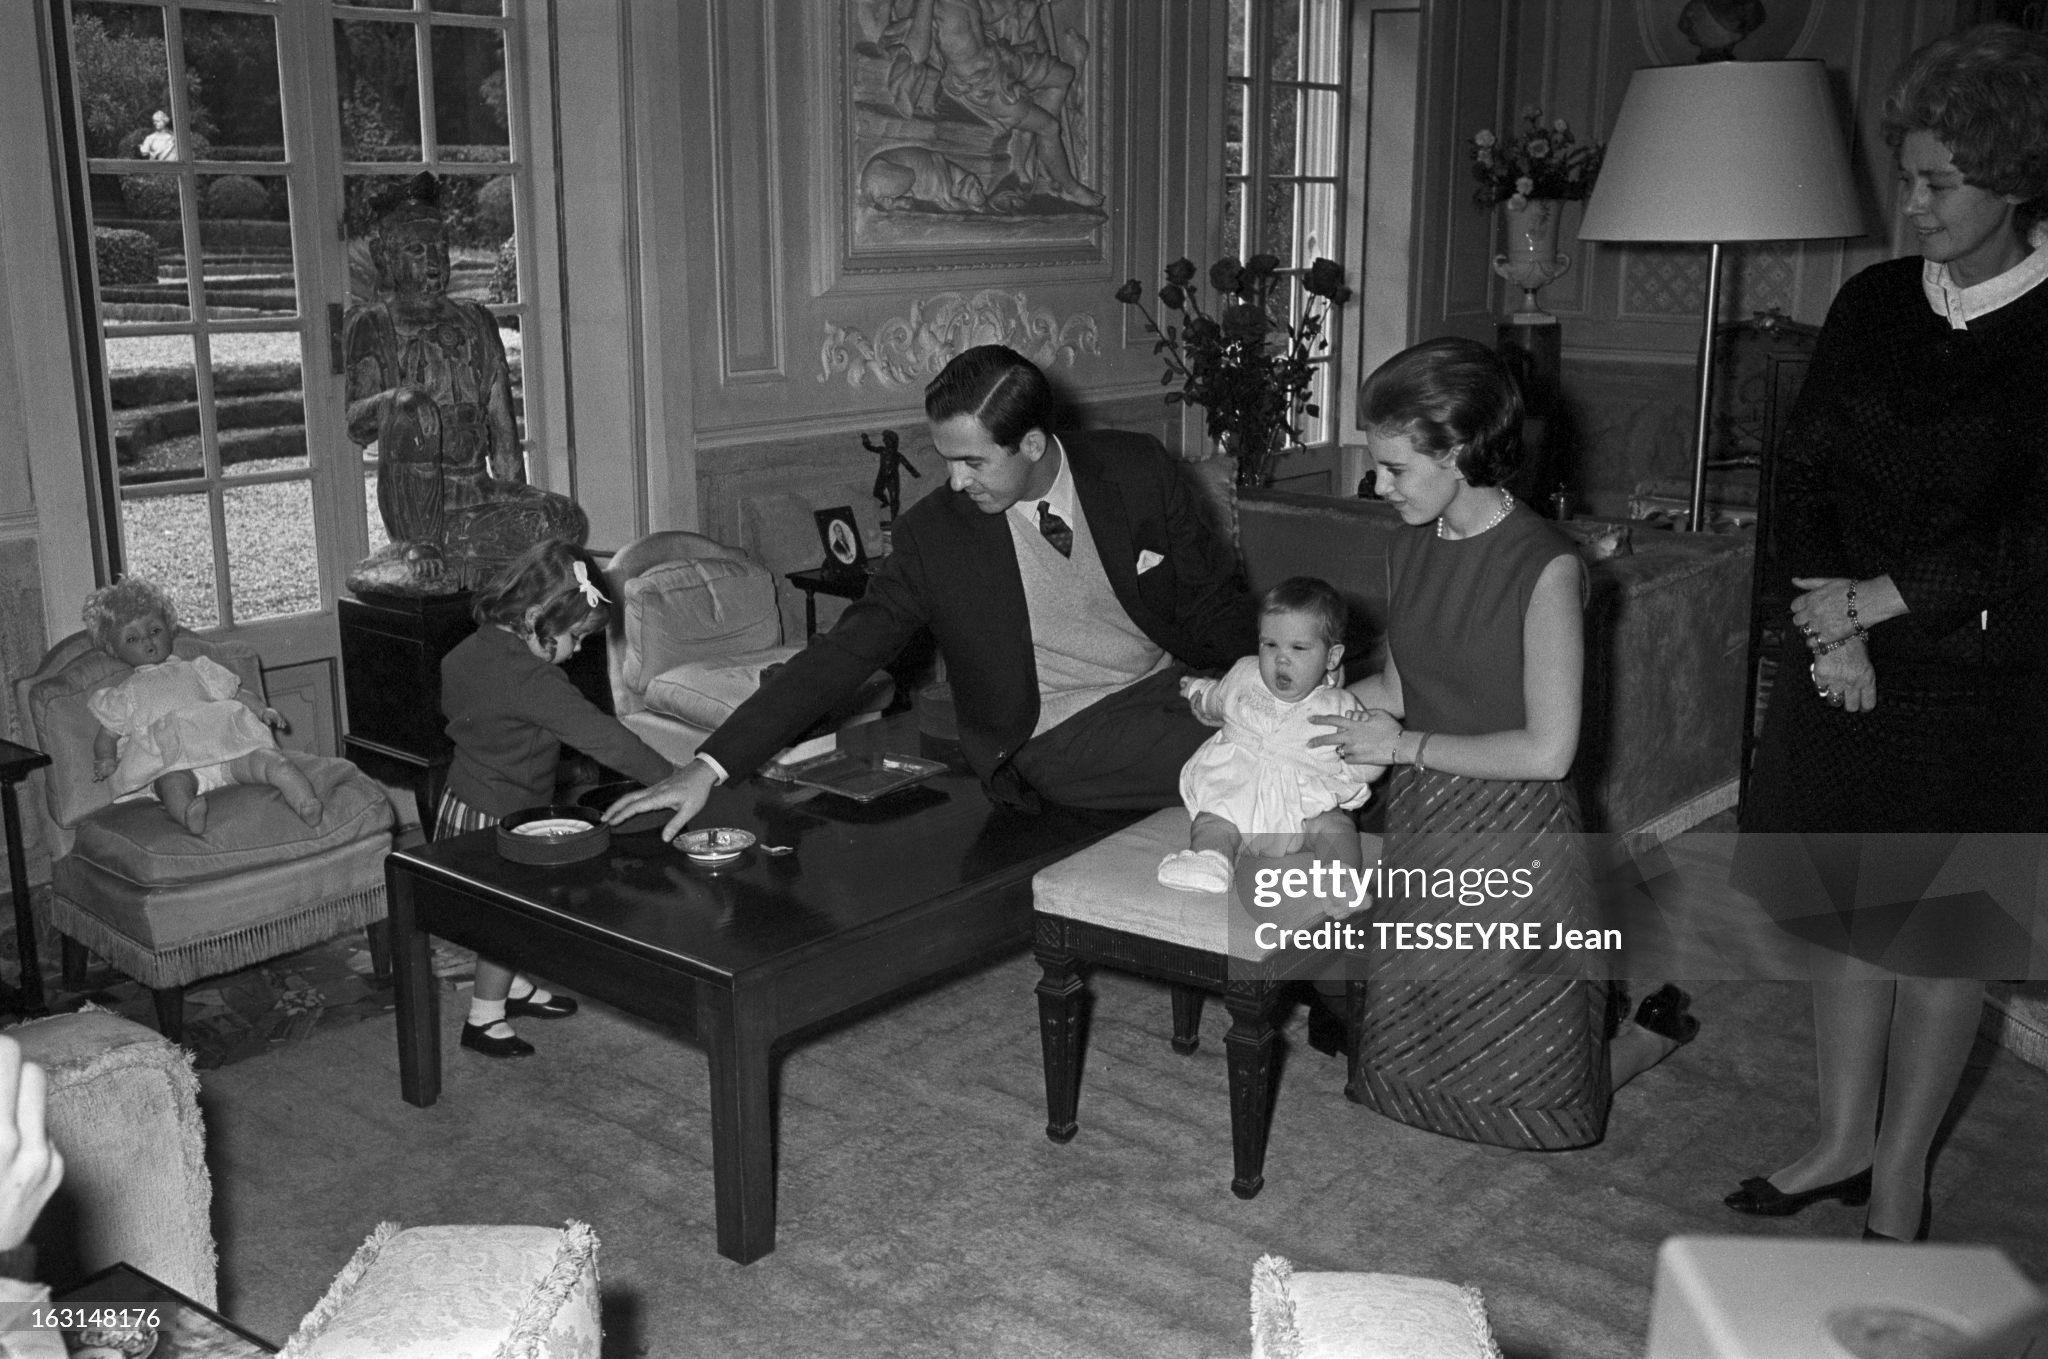 rendezvous-with-king-constantine-ii-of-greece-and-queen-anne-marie-of-greece-with-their.jpg